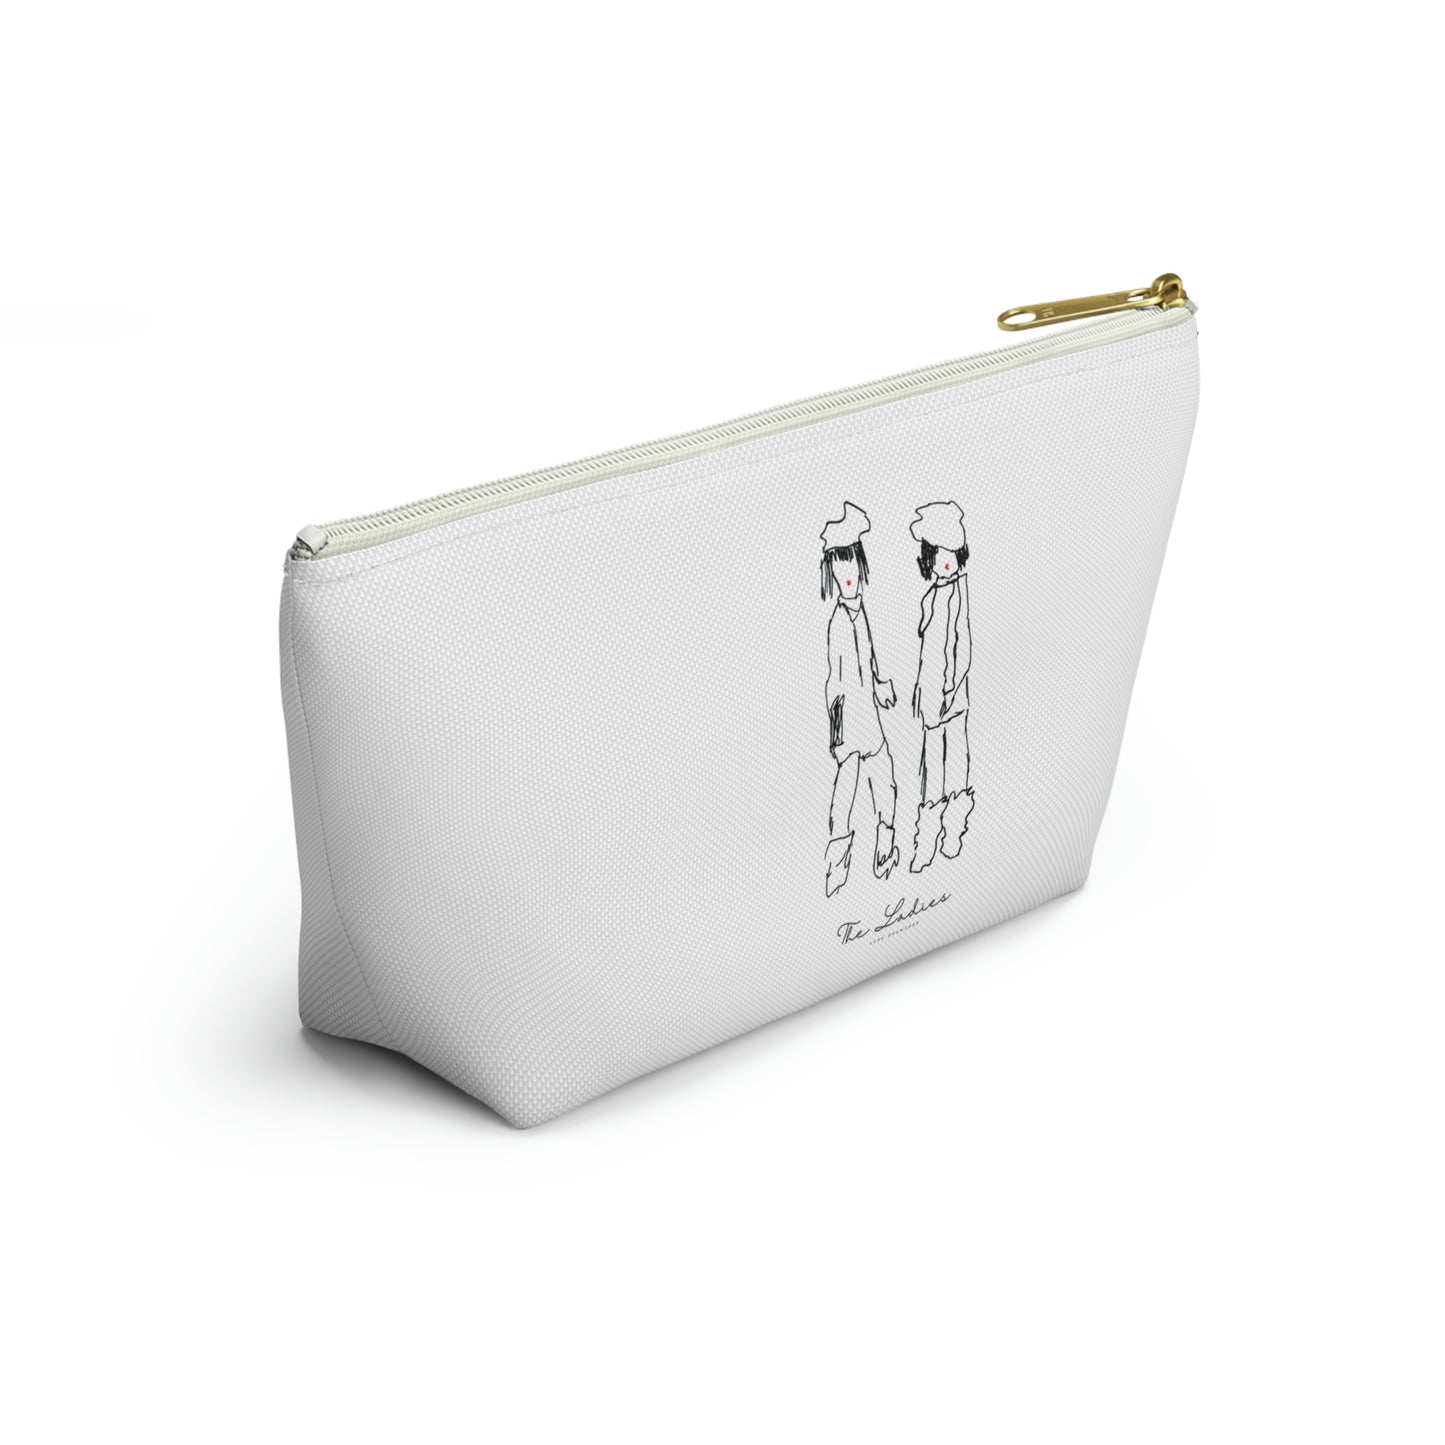 Liz and Bella Make-up Accessory Pouch w T-bottom